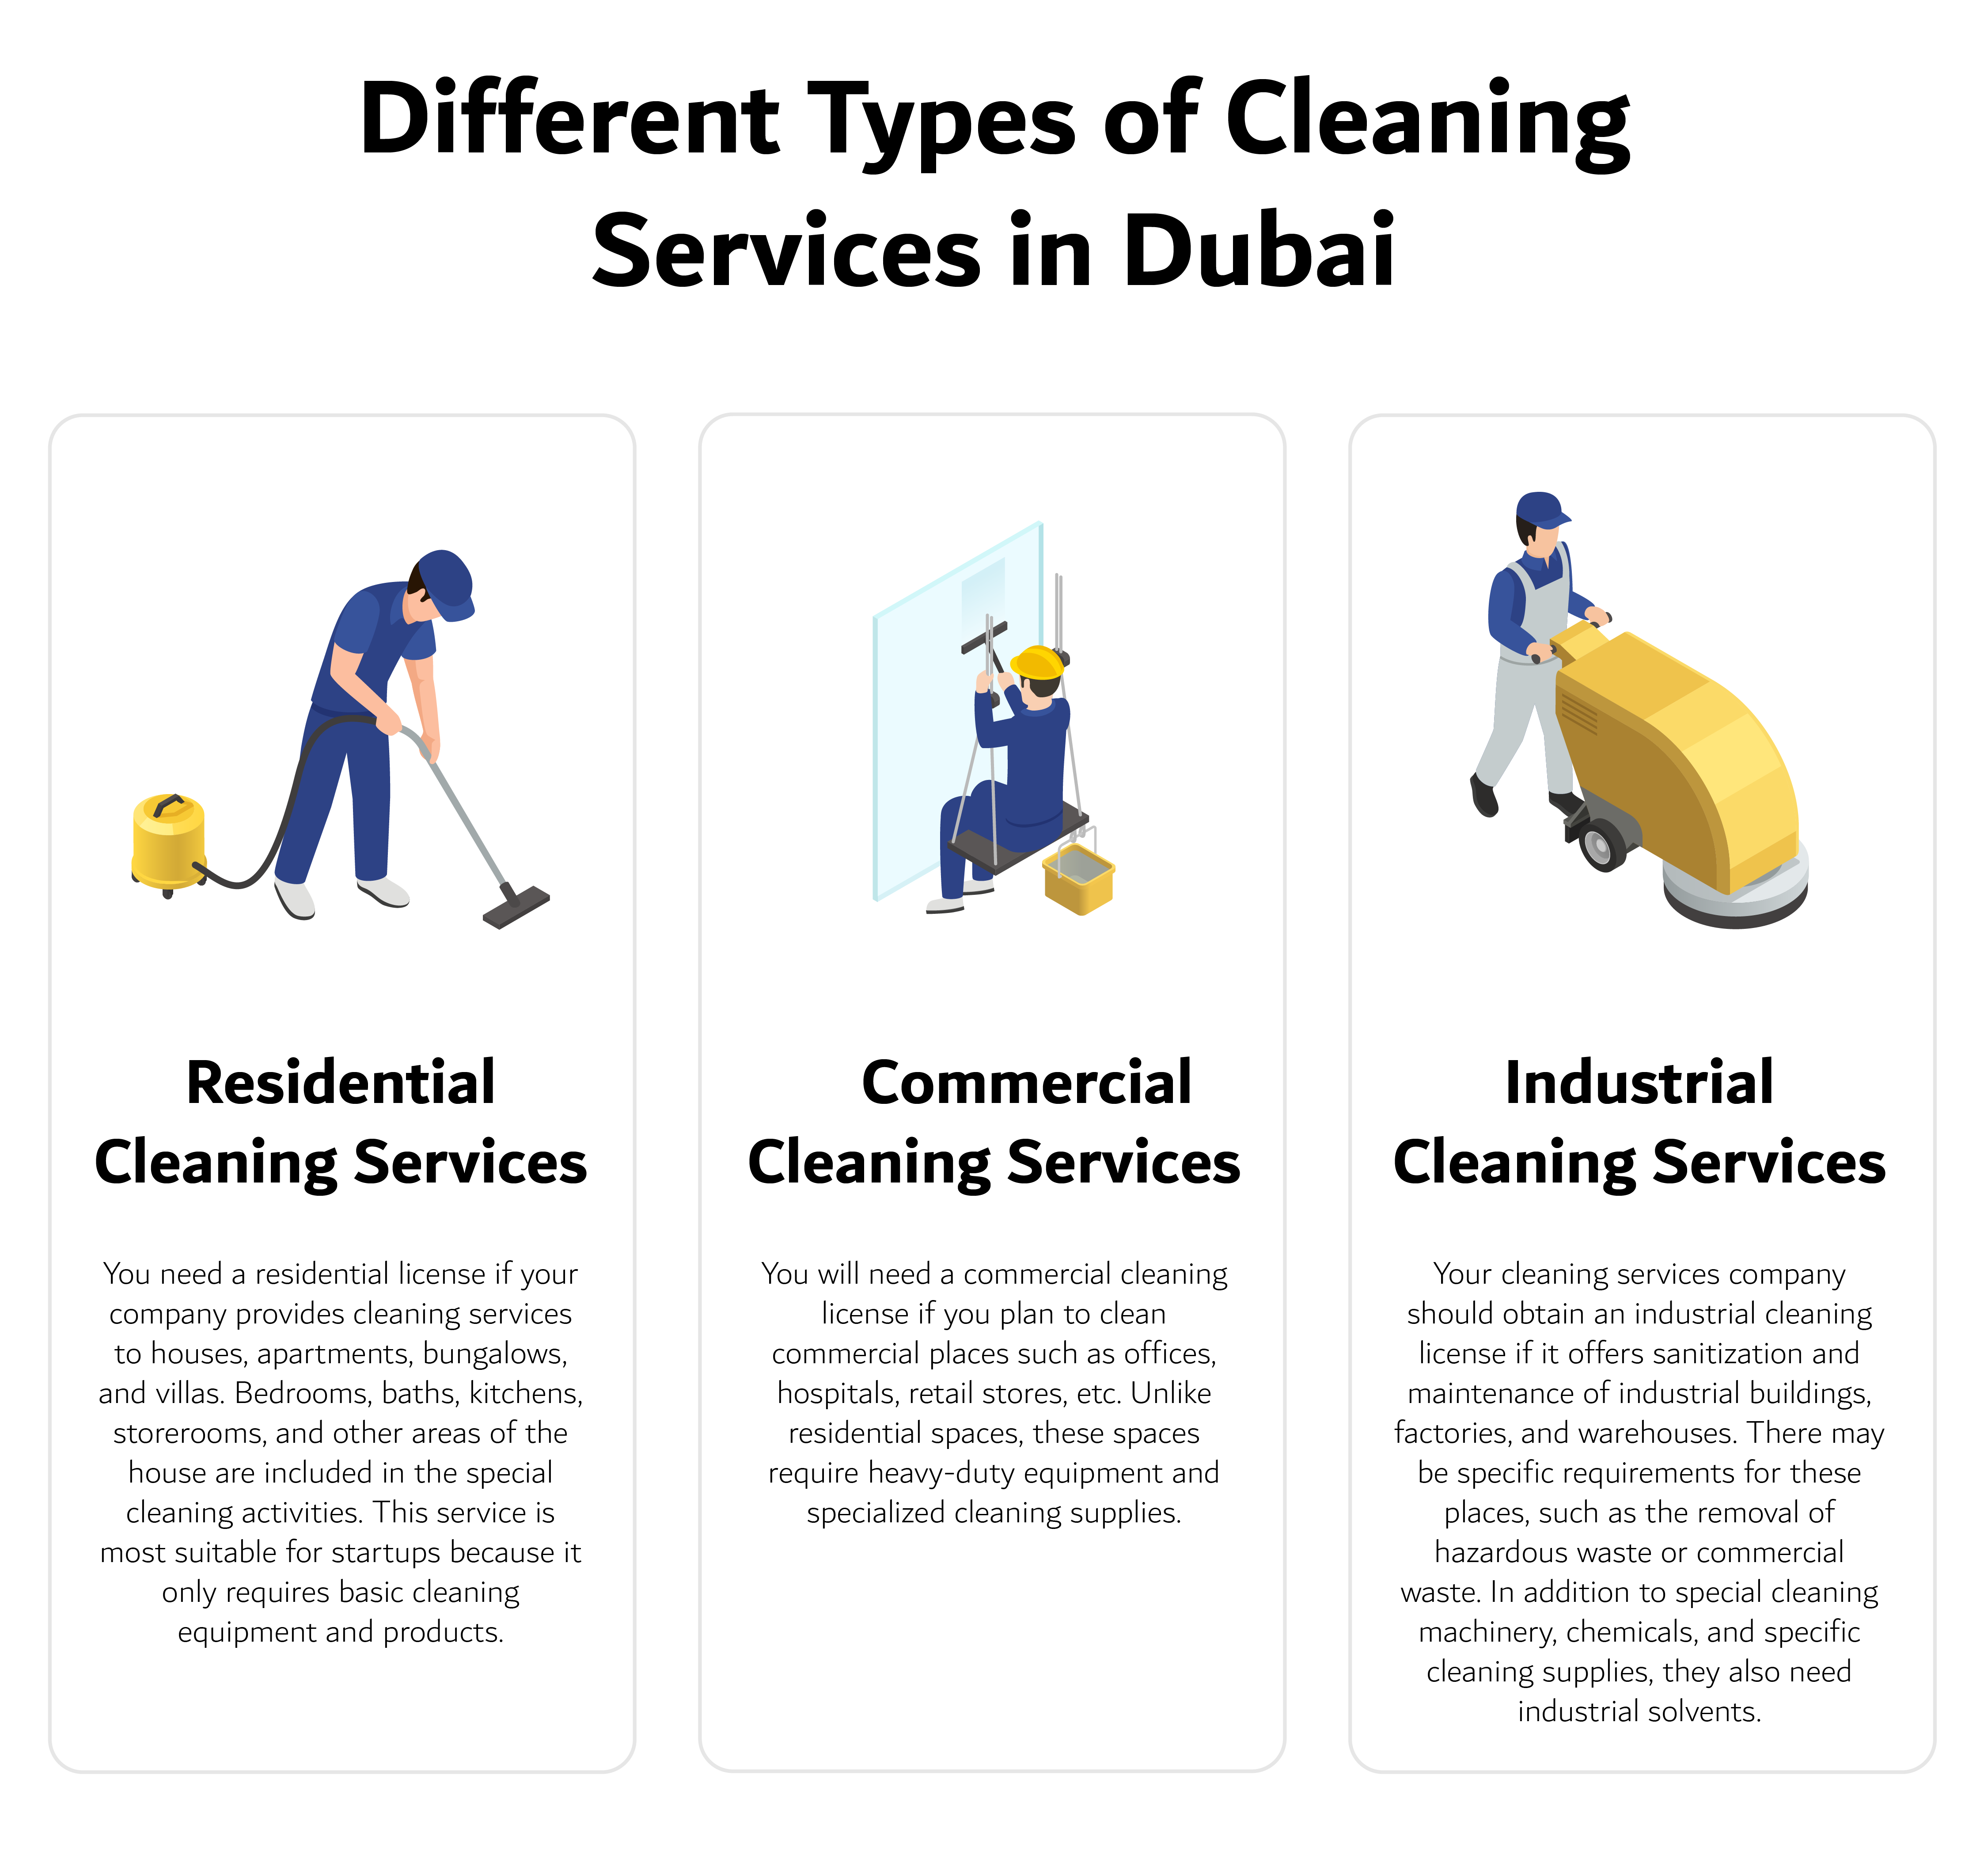 Different types of cleaning services in Dubai